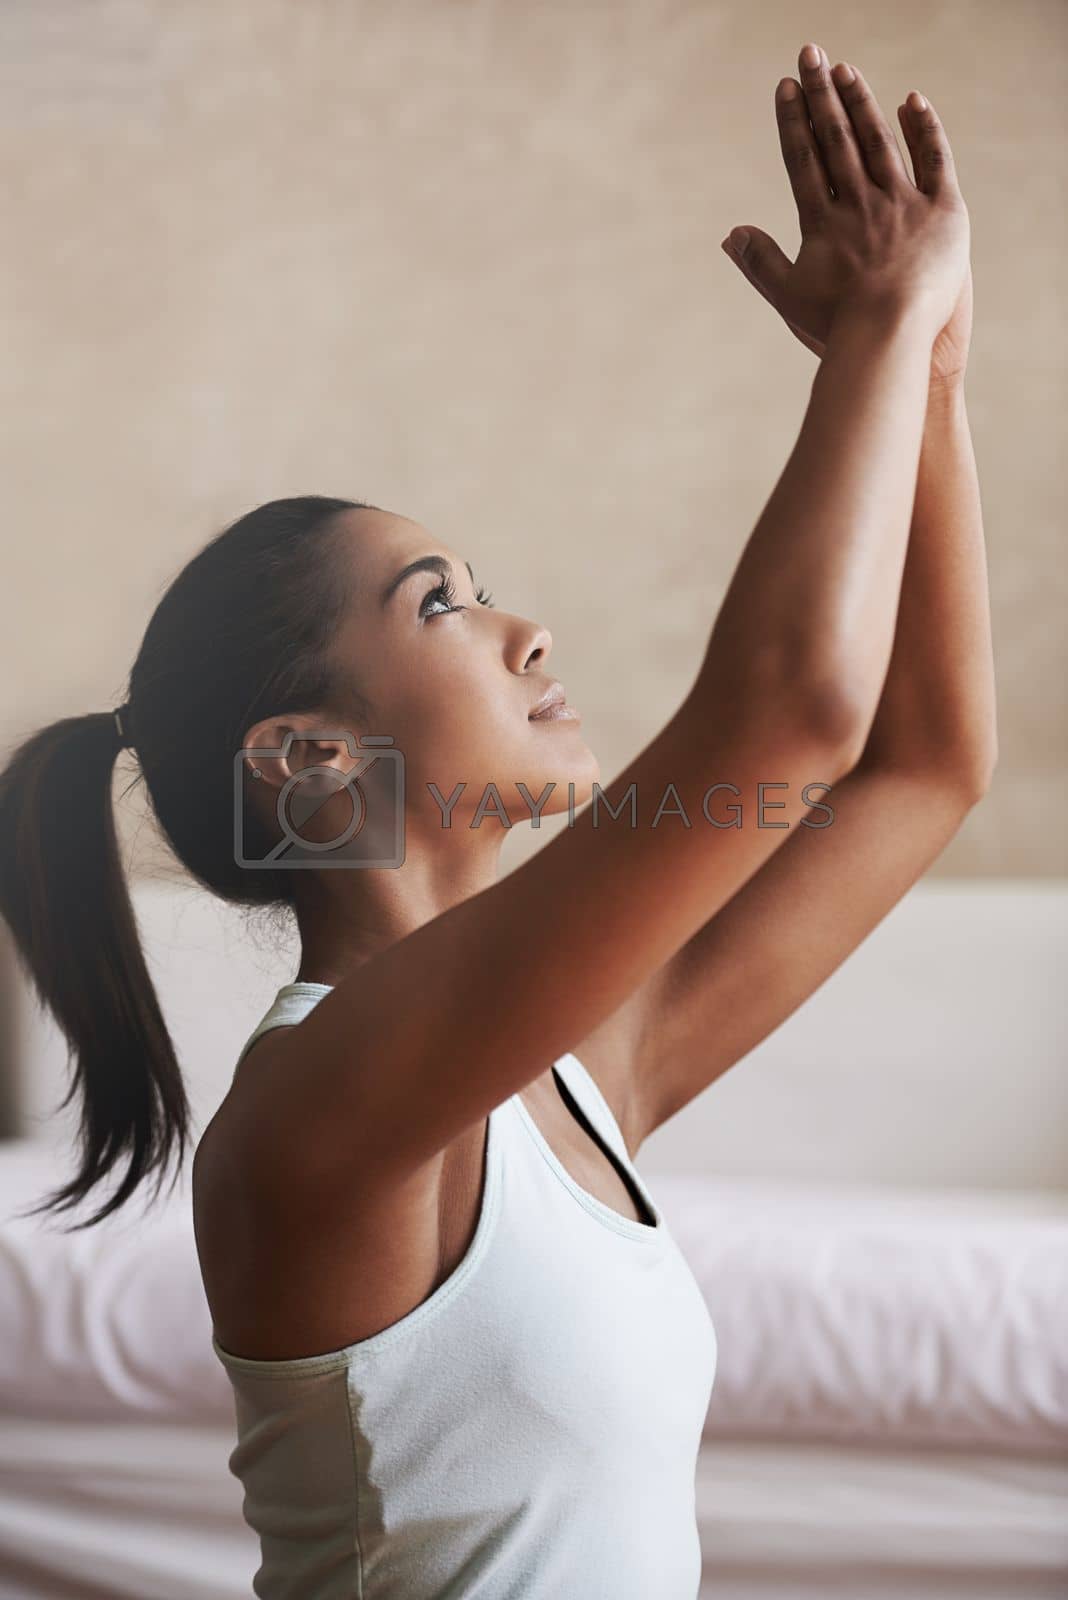 Royalty free image of Focus the mind, focus the body. a young woman doing yoga at home. by YuriArcurs